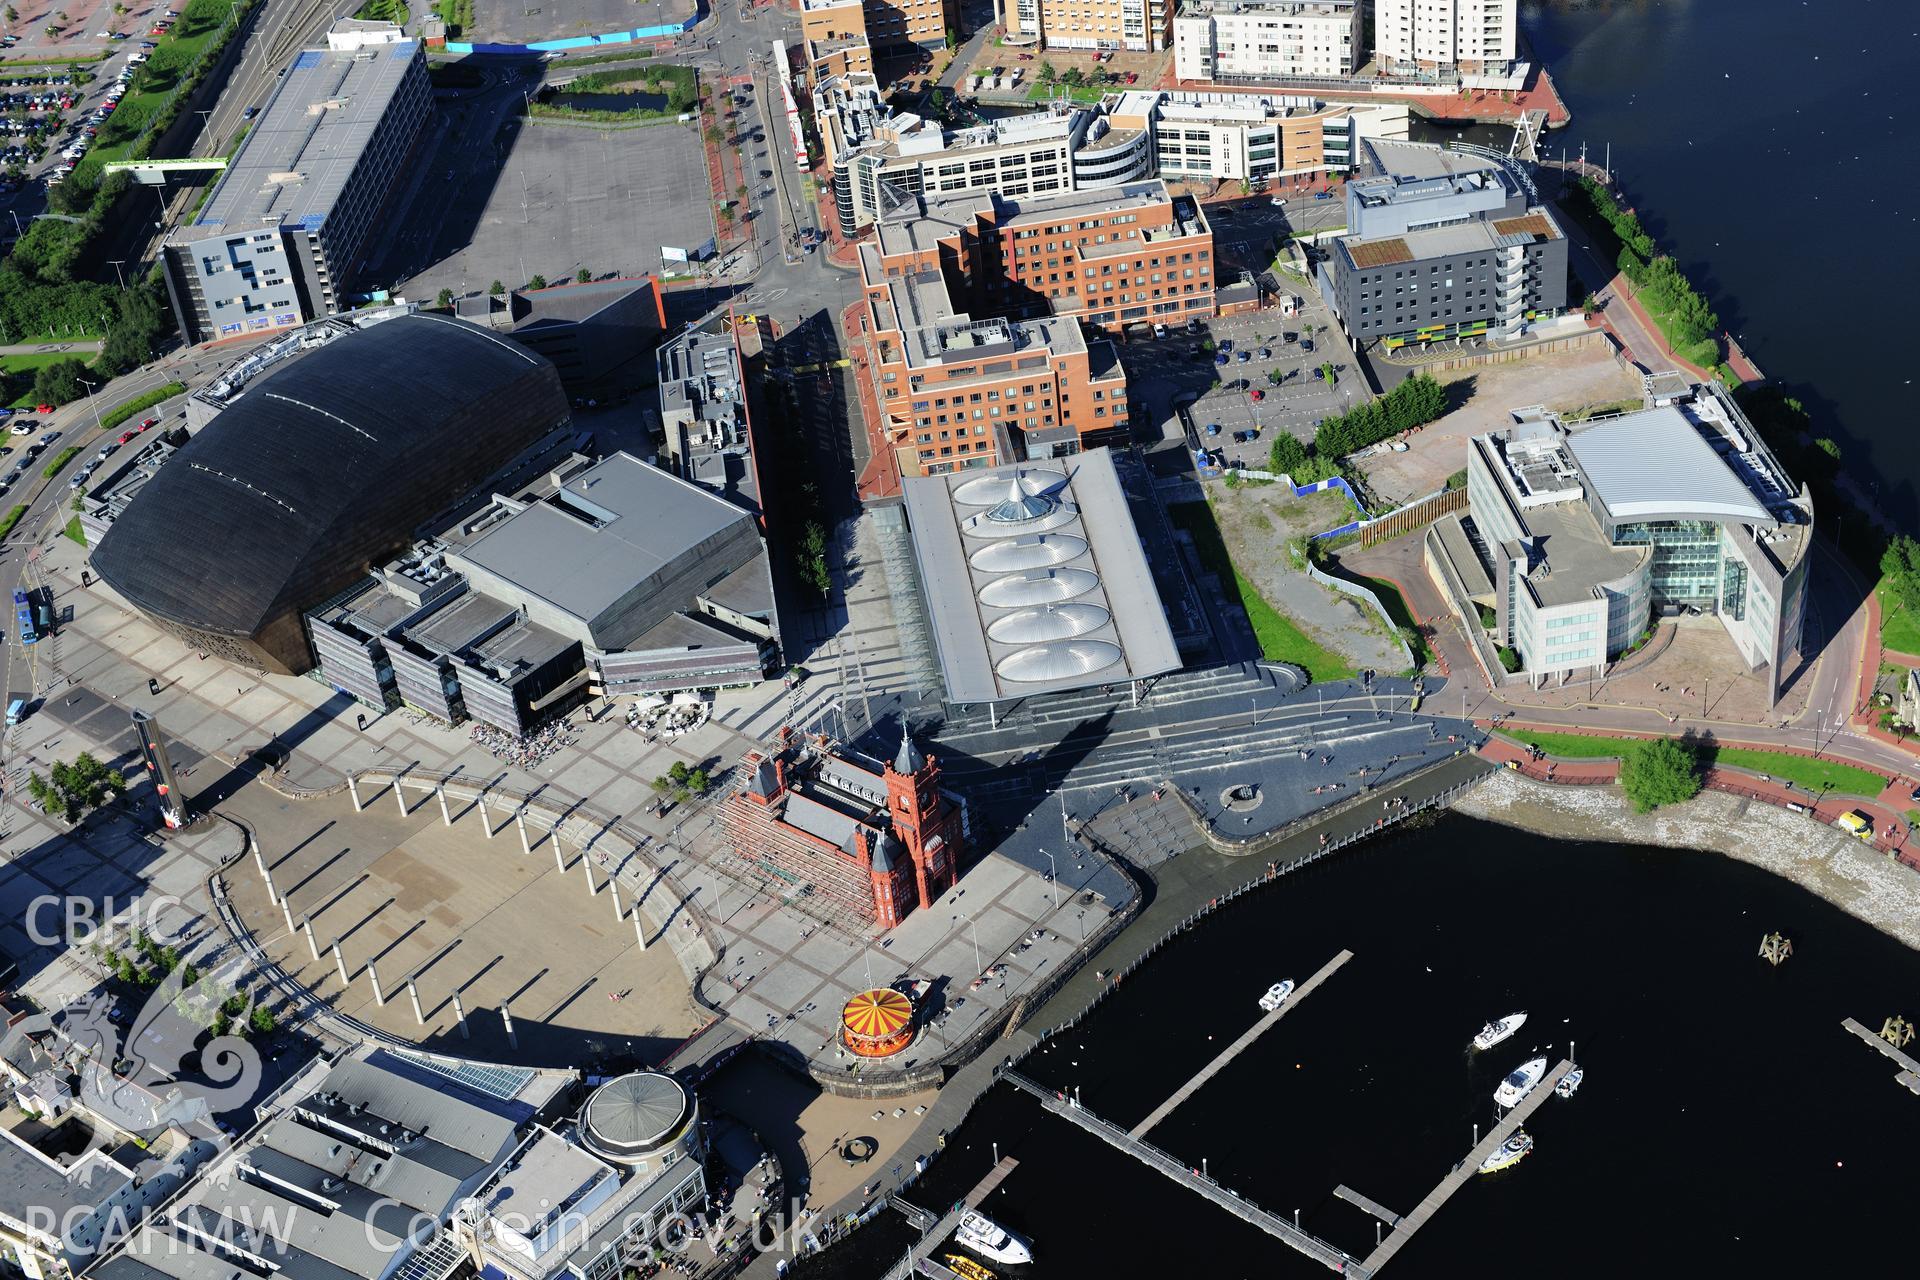 RCAHMW colour oblique photograph of Cardiff Bay, Pierhead Building and Senedd. Taken by Toby Driver on 24/07/2012.